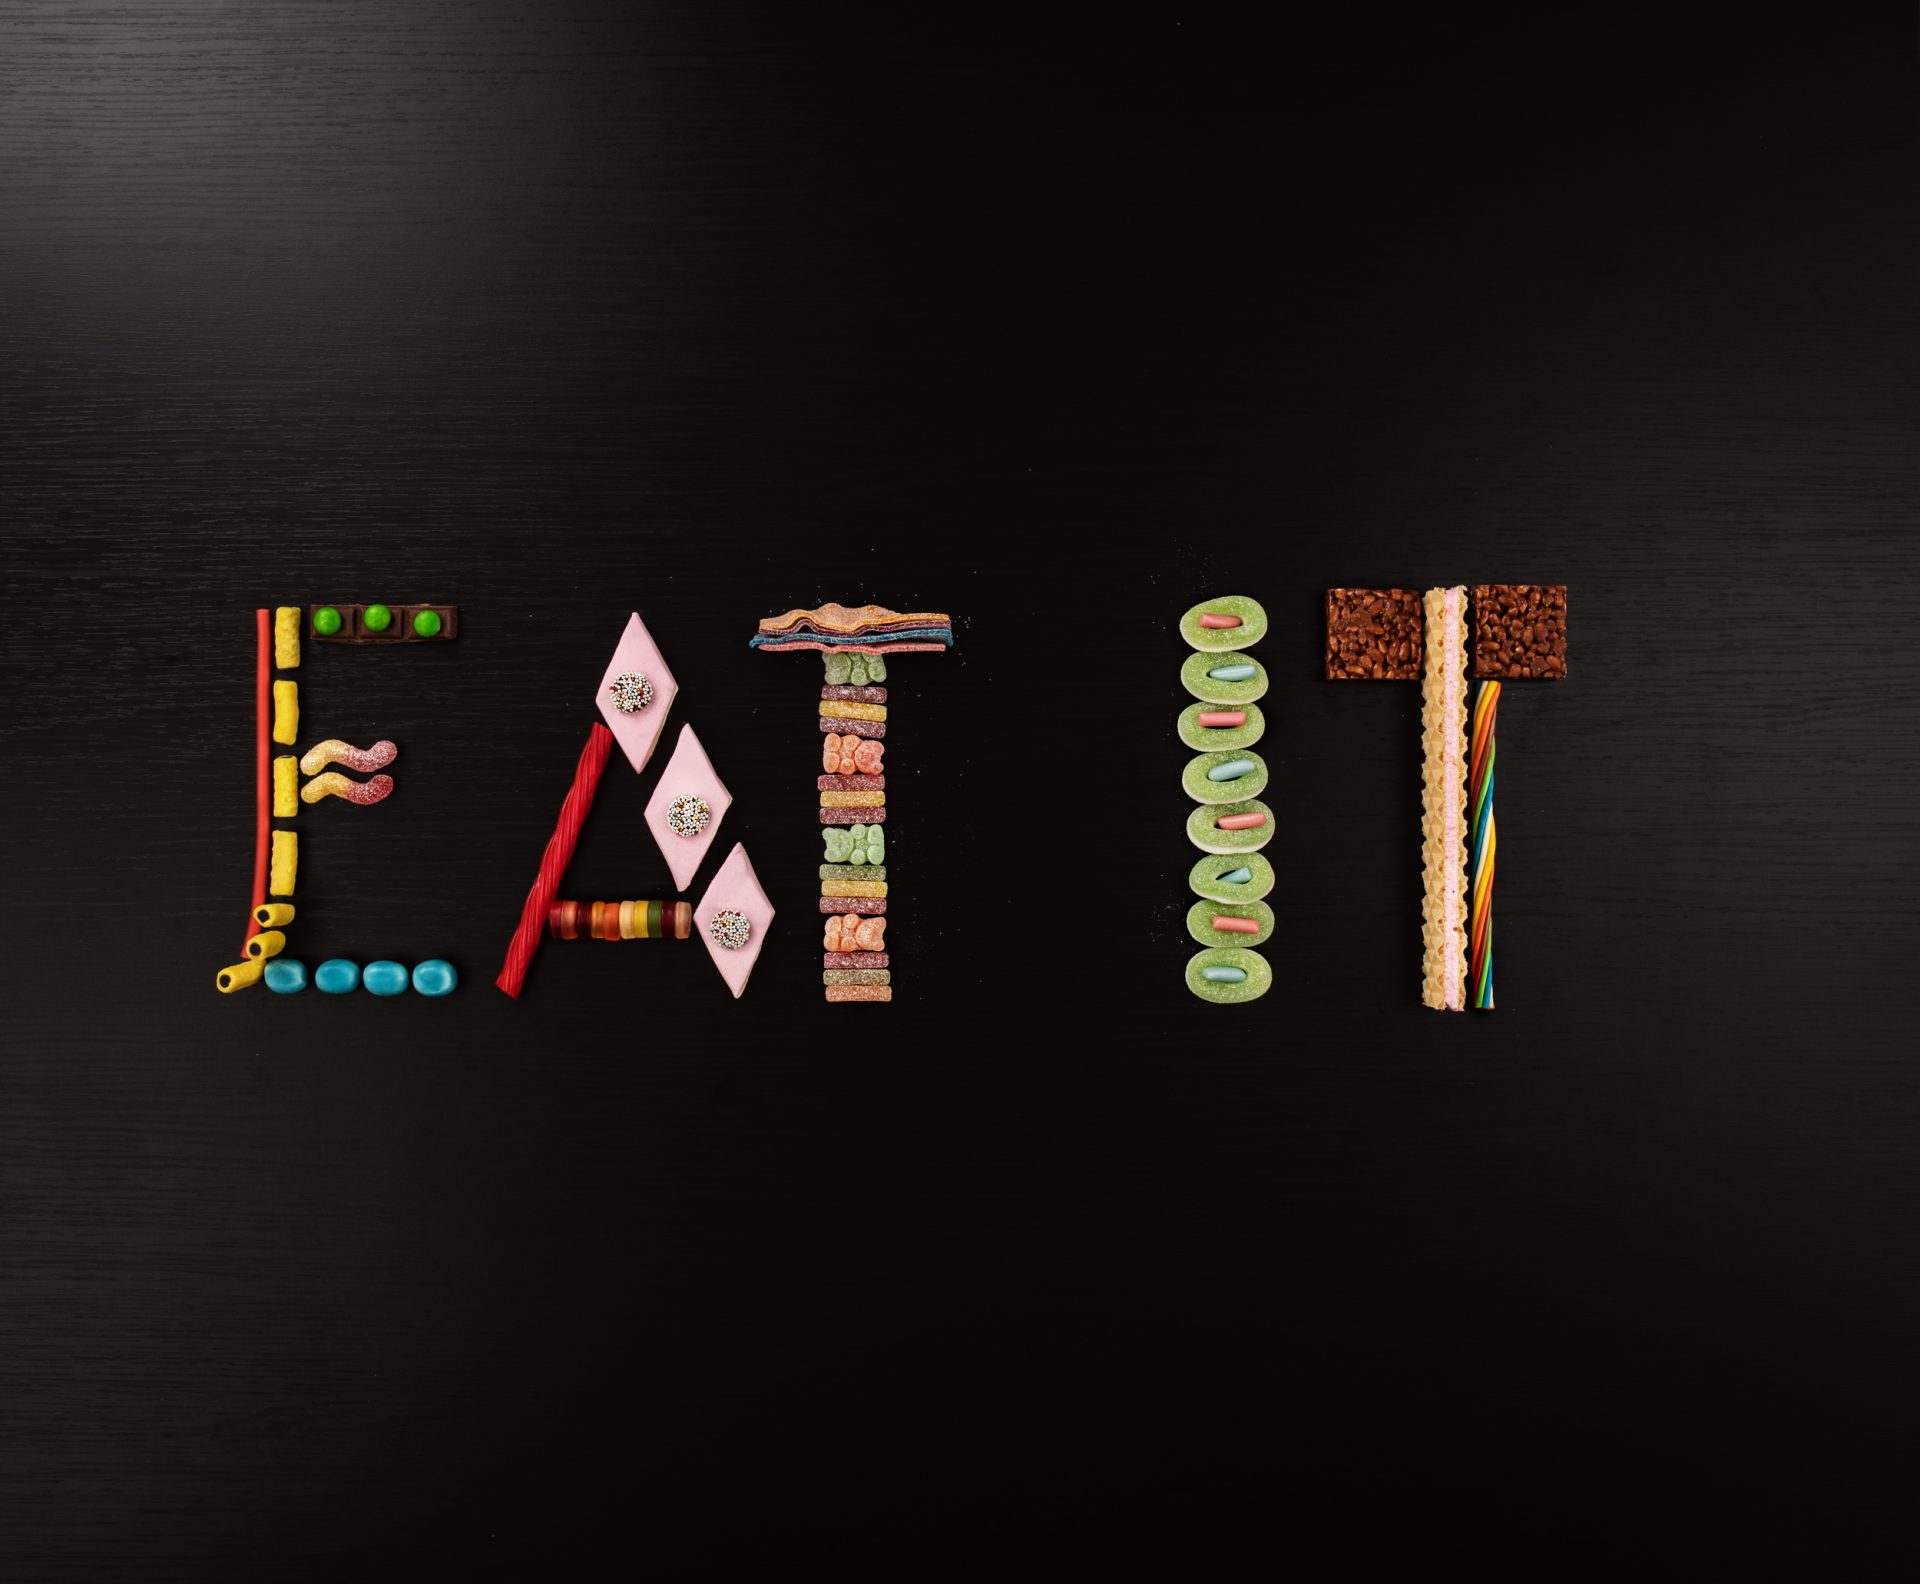 EAT IT- ABOUT FOOD